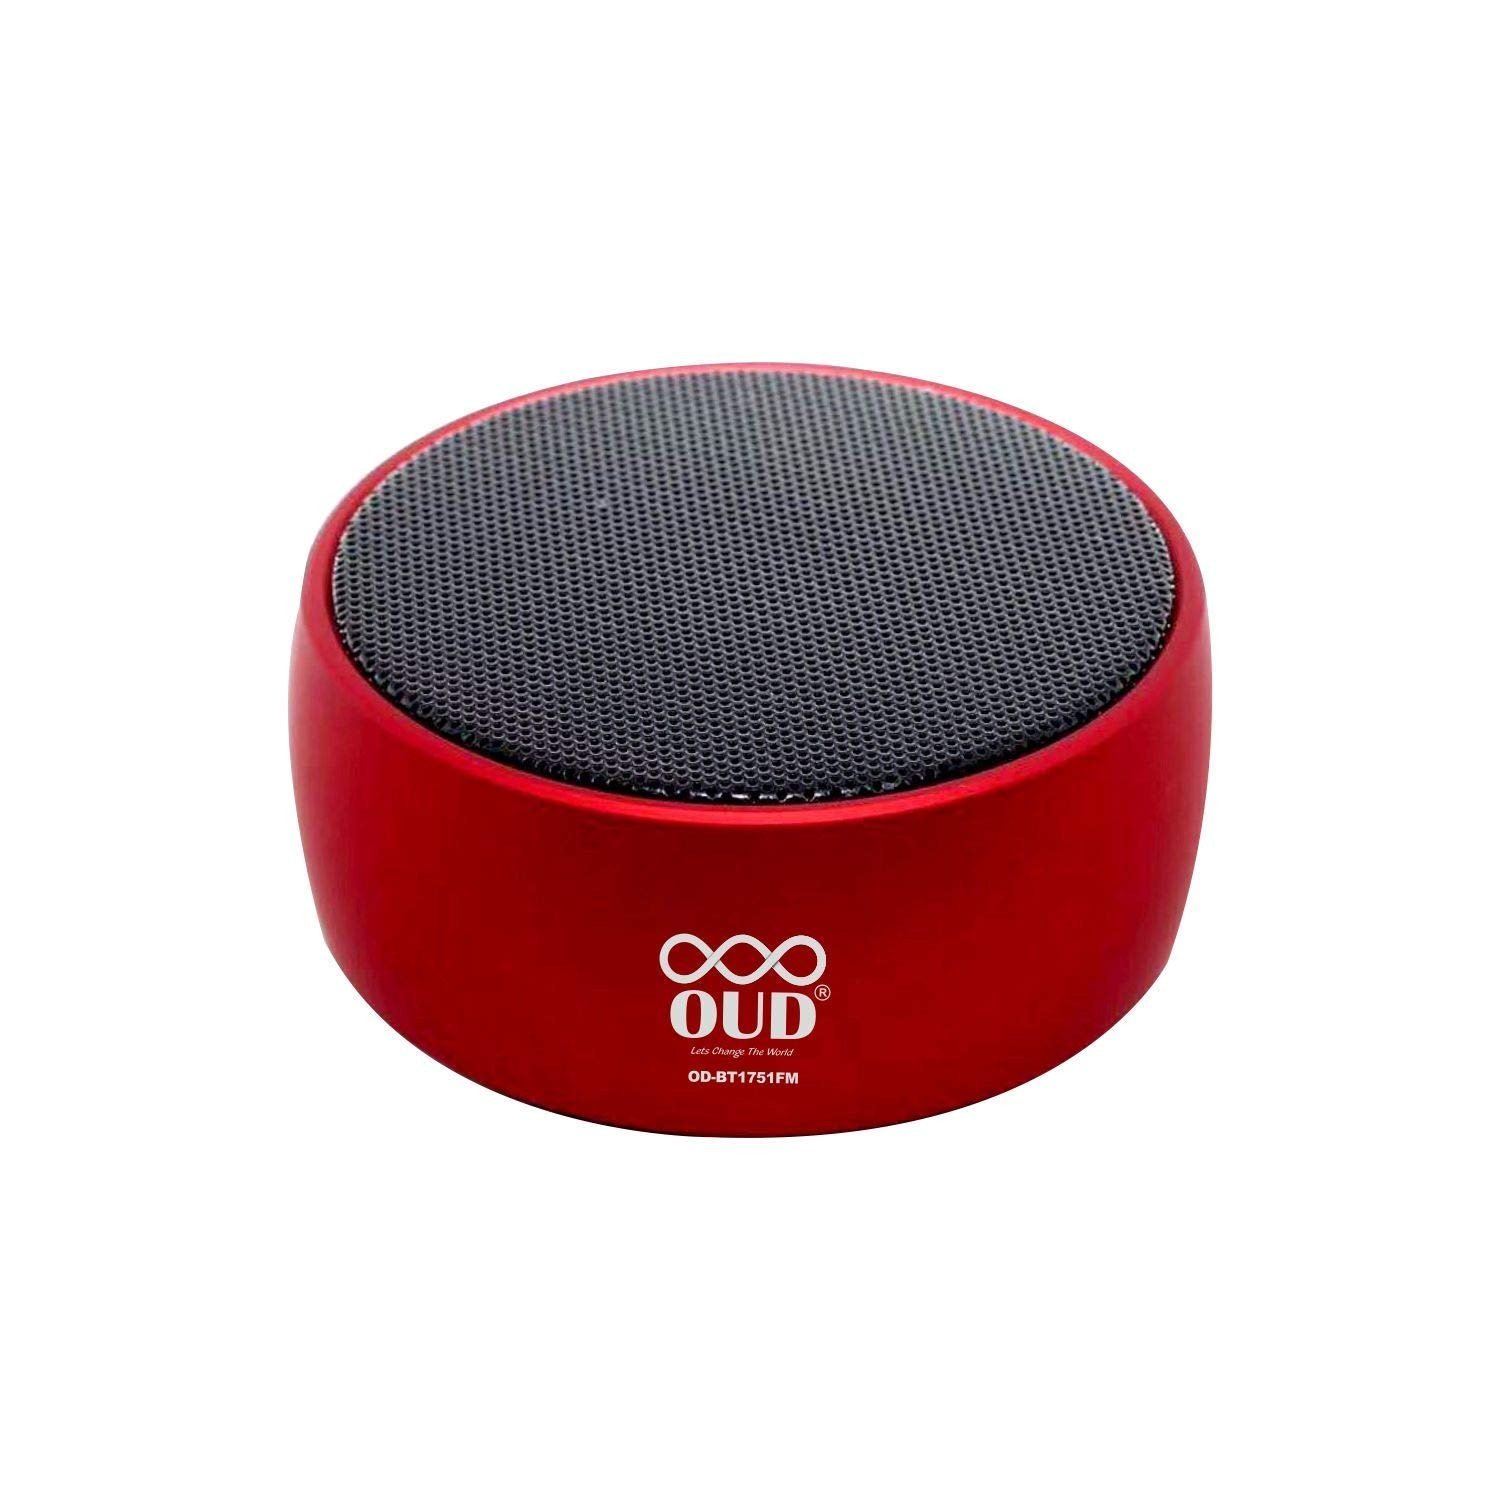 OUD Wireless 5W Super Bass Mini Metal Aluminium Alloy Portable Bluetooth Speaker with Mic/FM Radio/TWS/USB Disk/SD Card/AUX Input,Enriched with Calling Feature